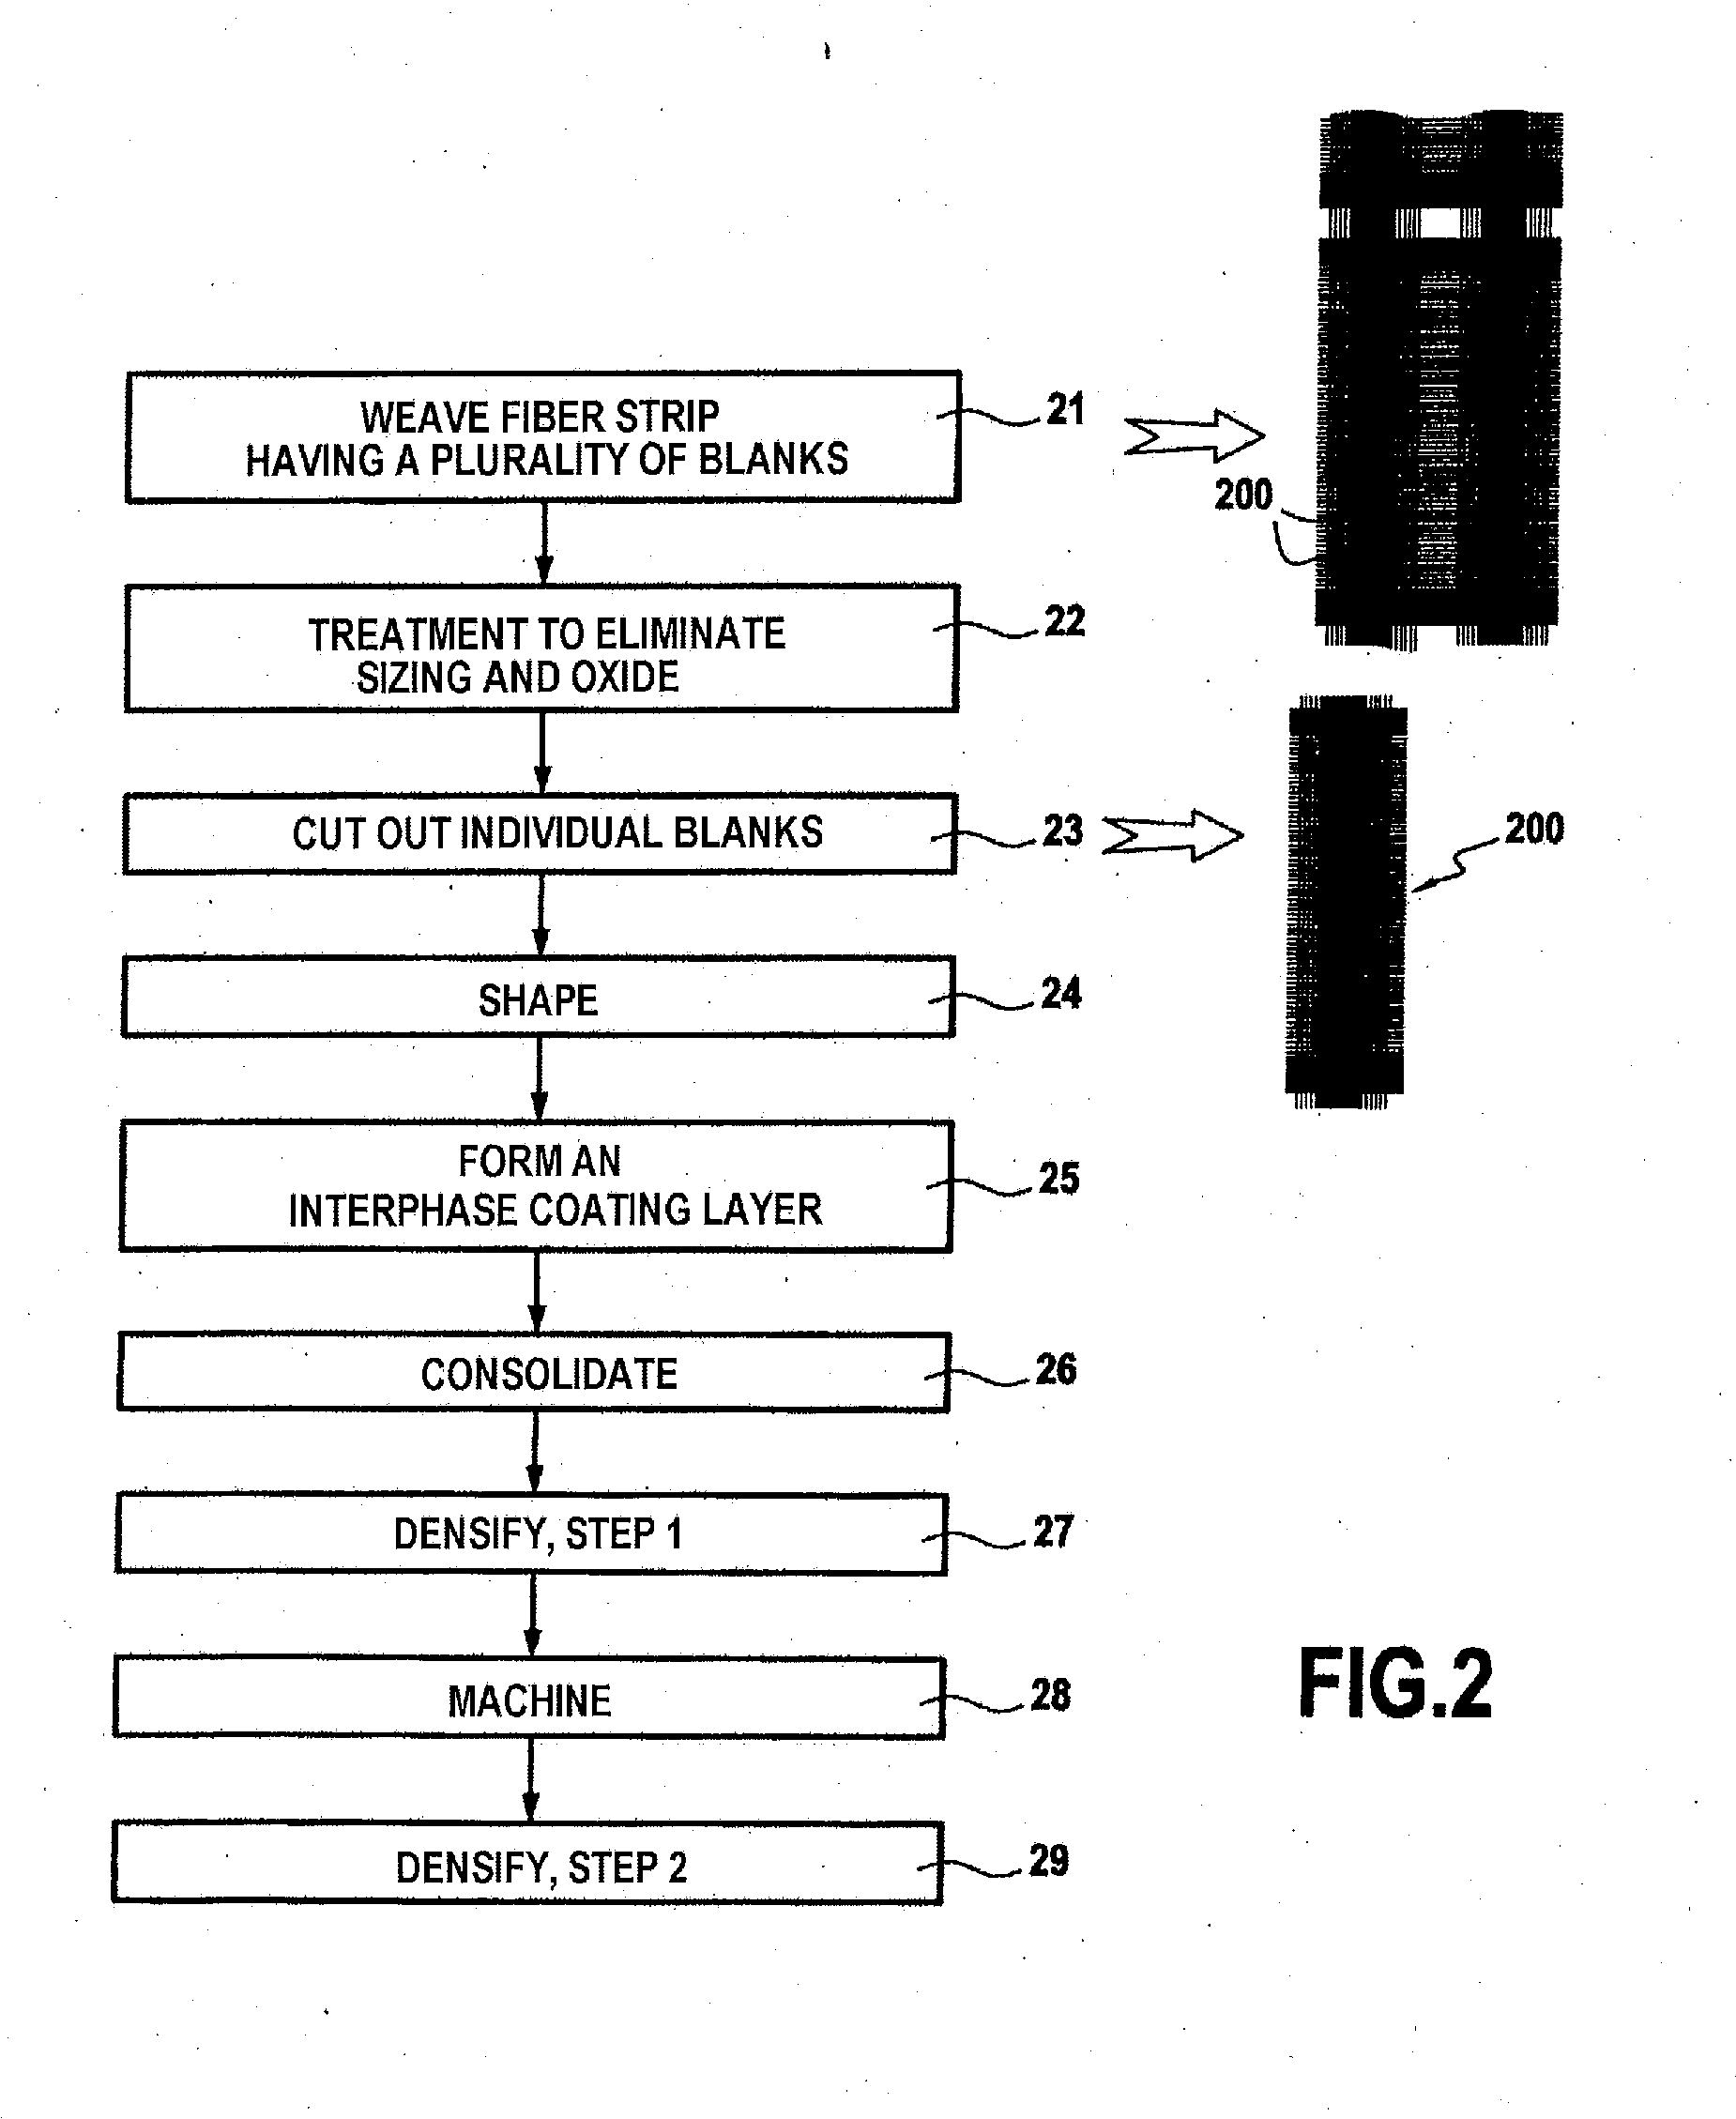 Method for manufacturing a complexly shaped composite material part